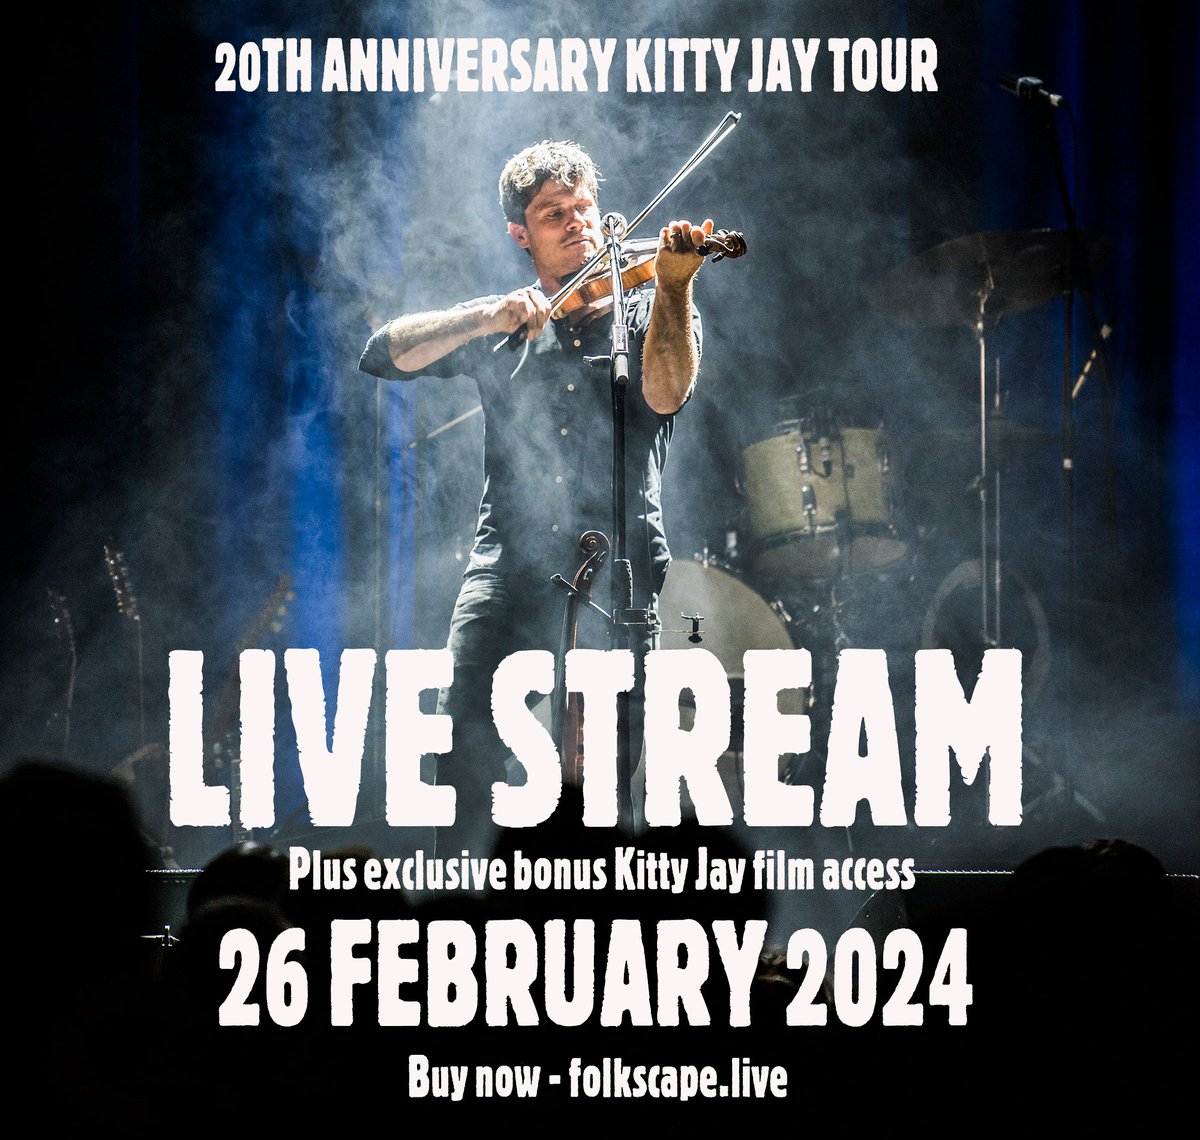 We've teamed up with FolkScape to LIVESTREAM our show from Chester on Monday! Tickets available to buy in advance now - folkscape.live AND if you buy a streaming ticket prior to the concert you also get early access to the second and third parts to the Kitty Jay film